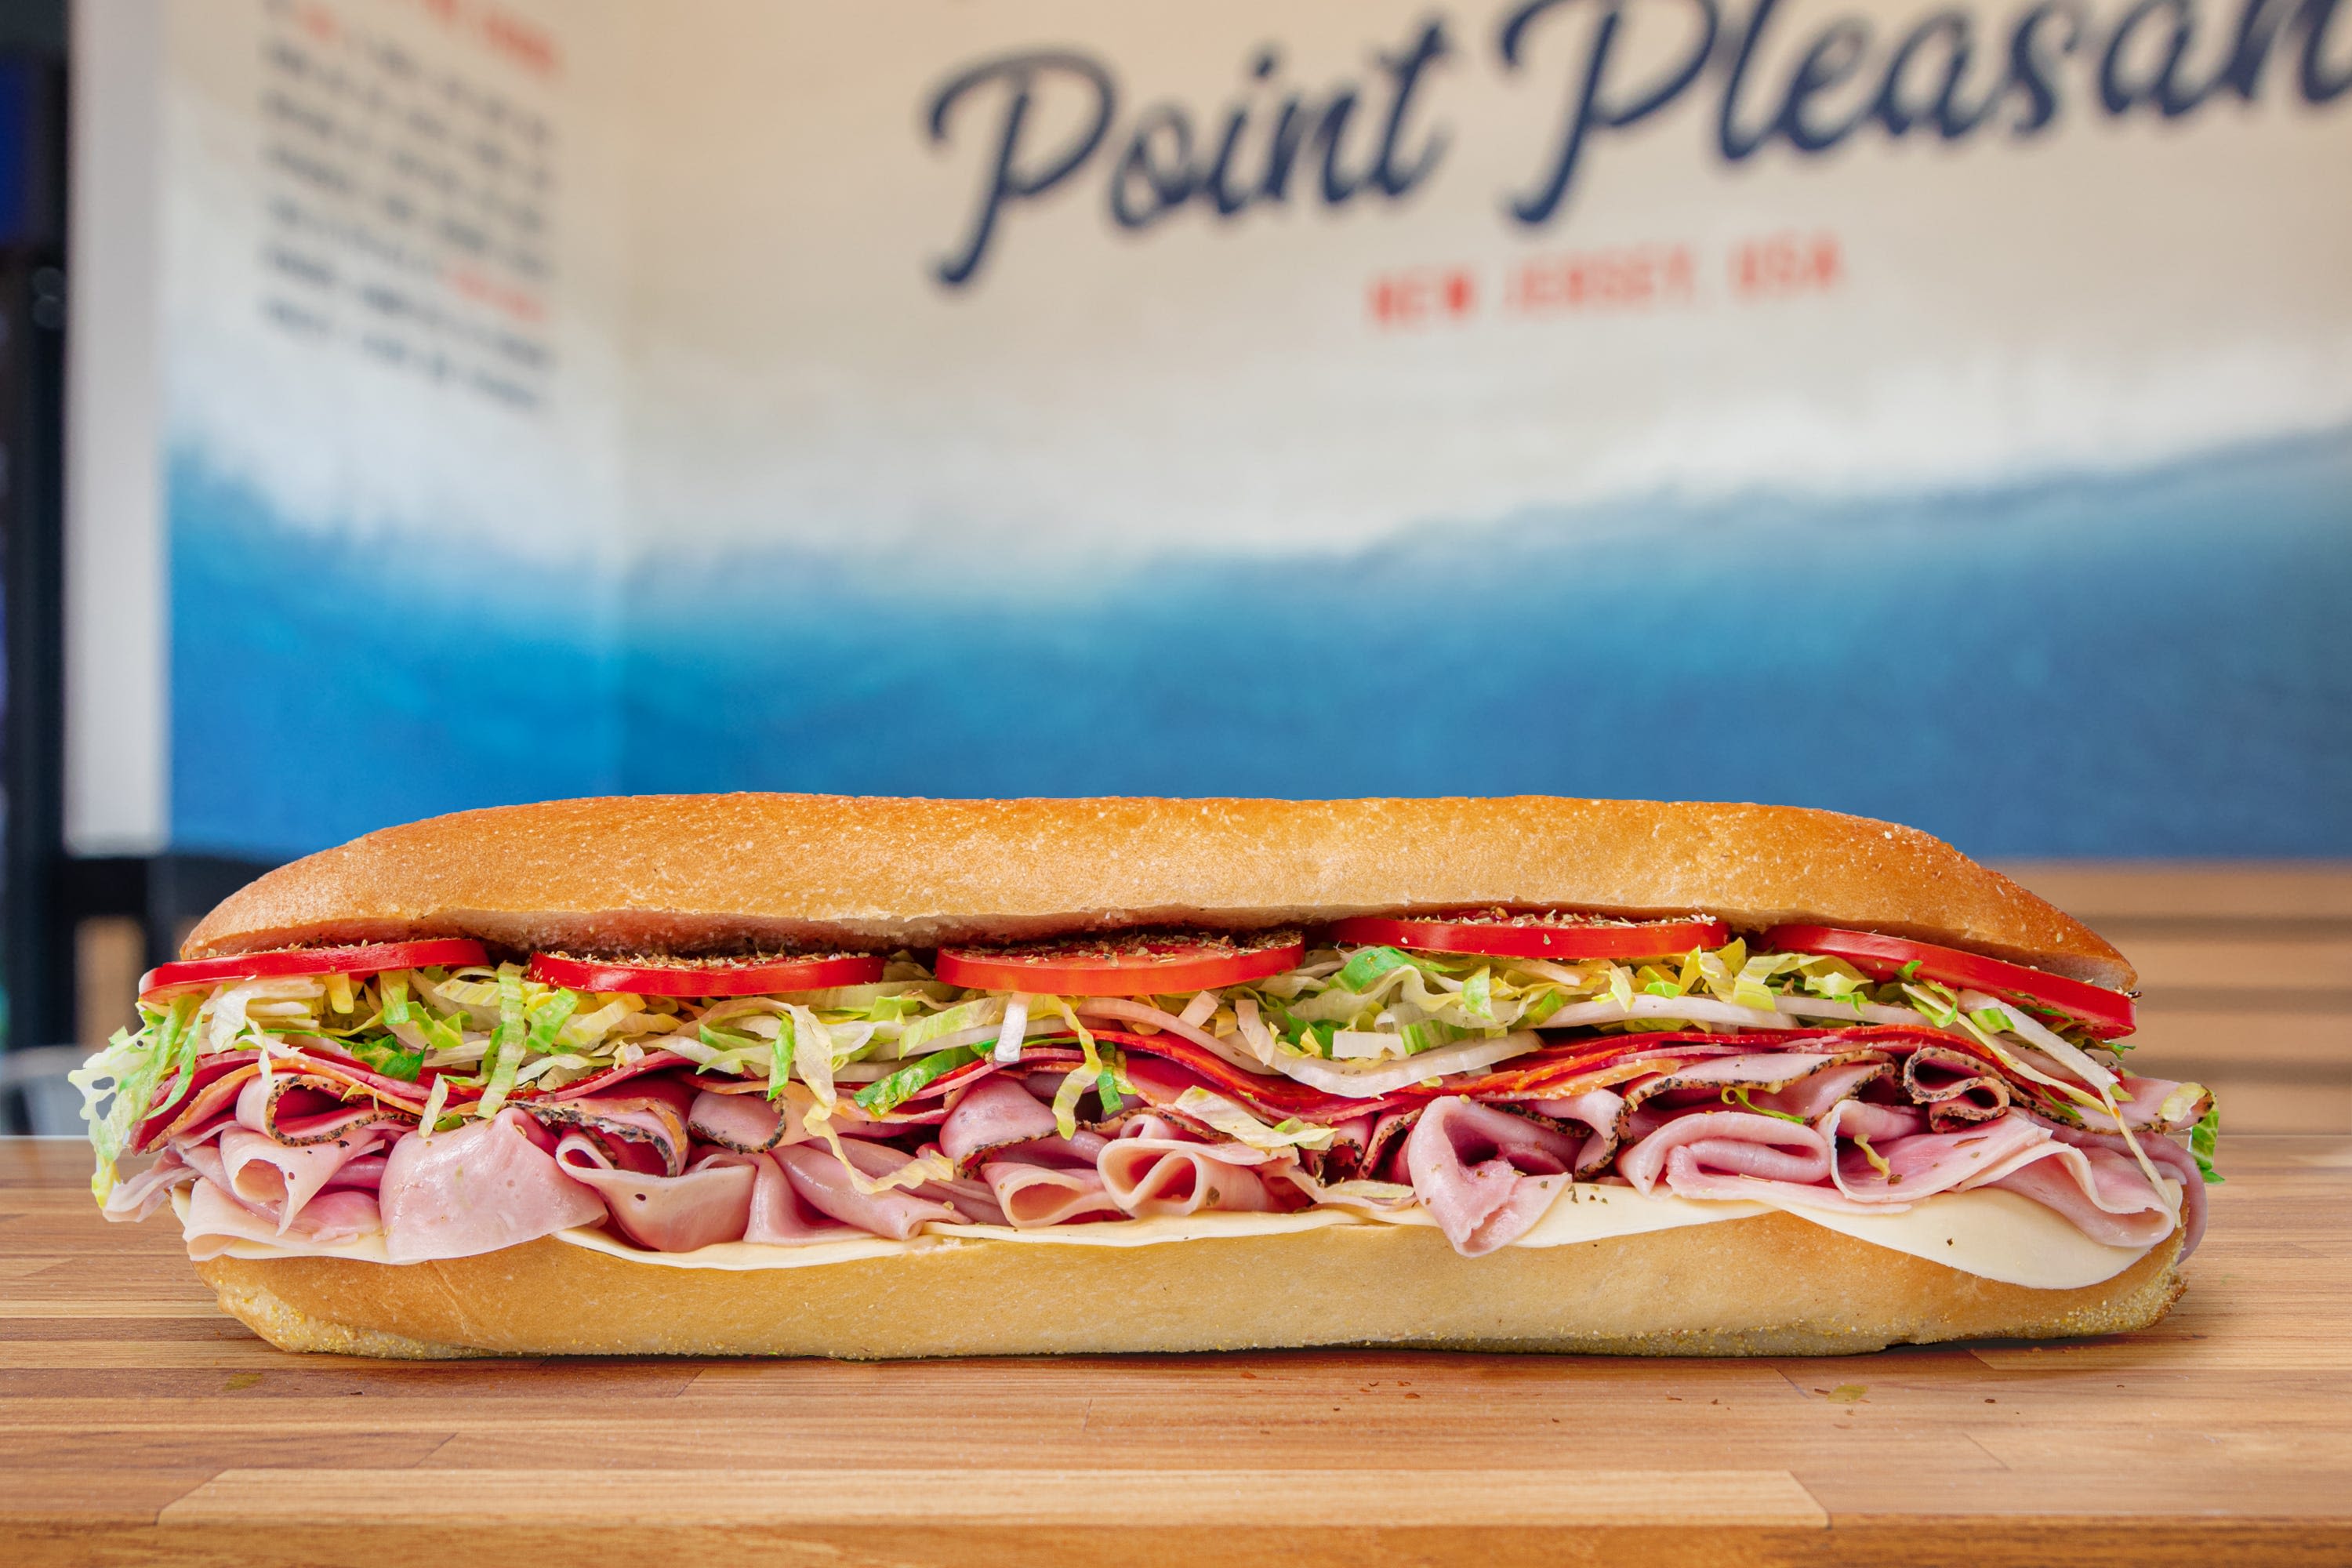 Jersey Mike's Subs opens its new location in Des Moines on Wednesday